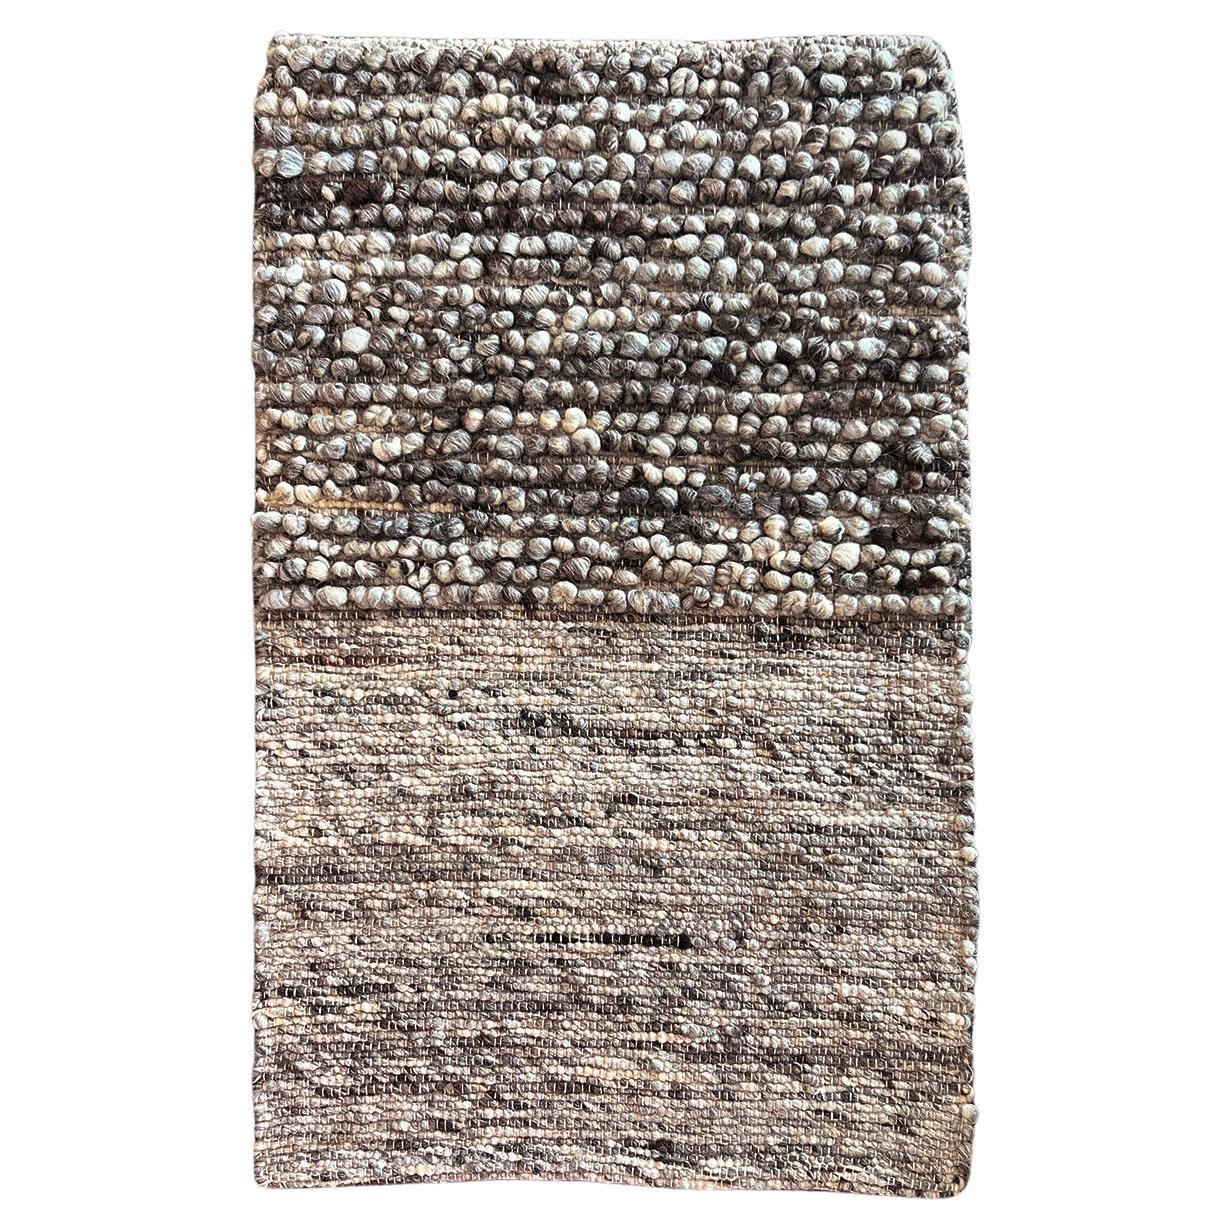 Fatima Half Bobble Sheep Wool Area Rug in Gray 2.5ft by 4ft, Handmade For Sale